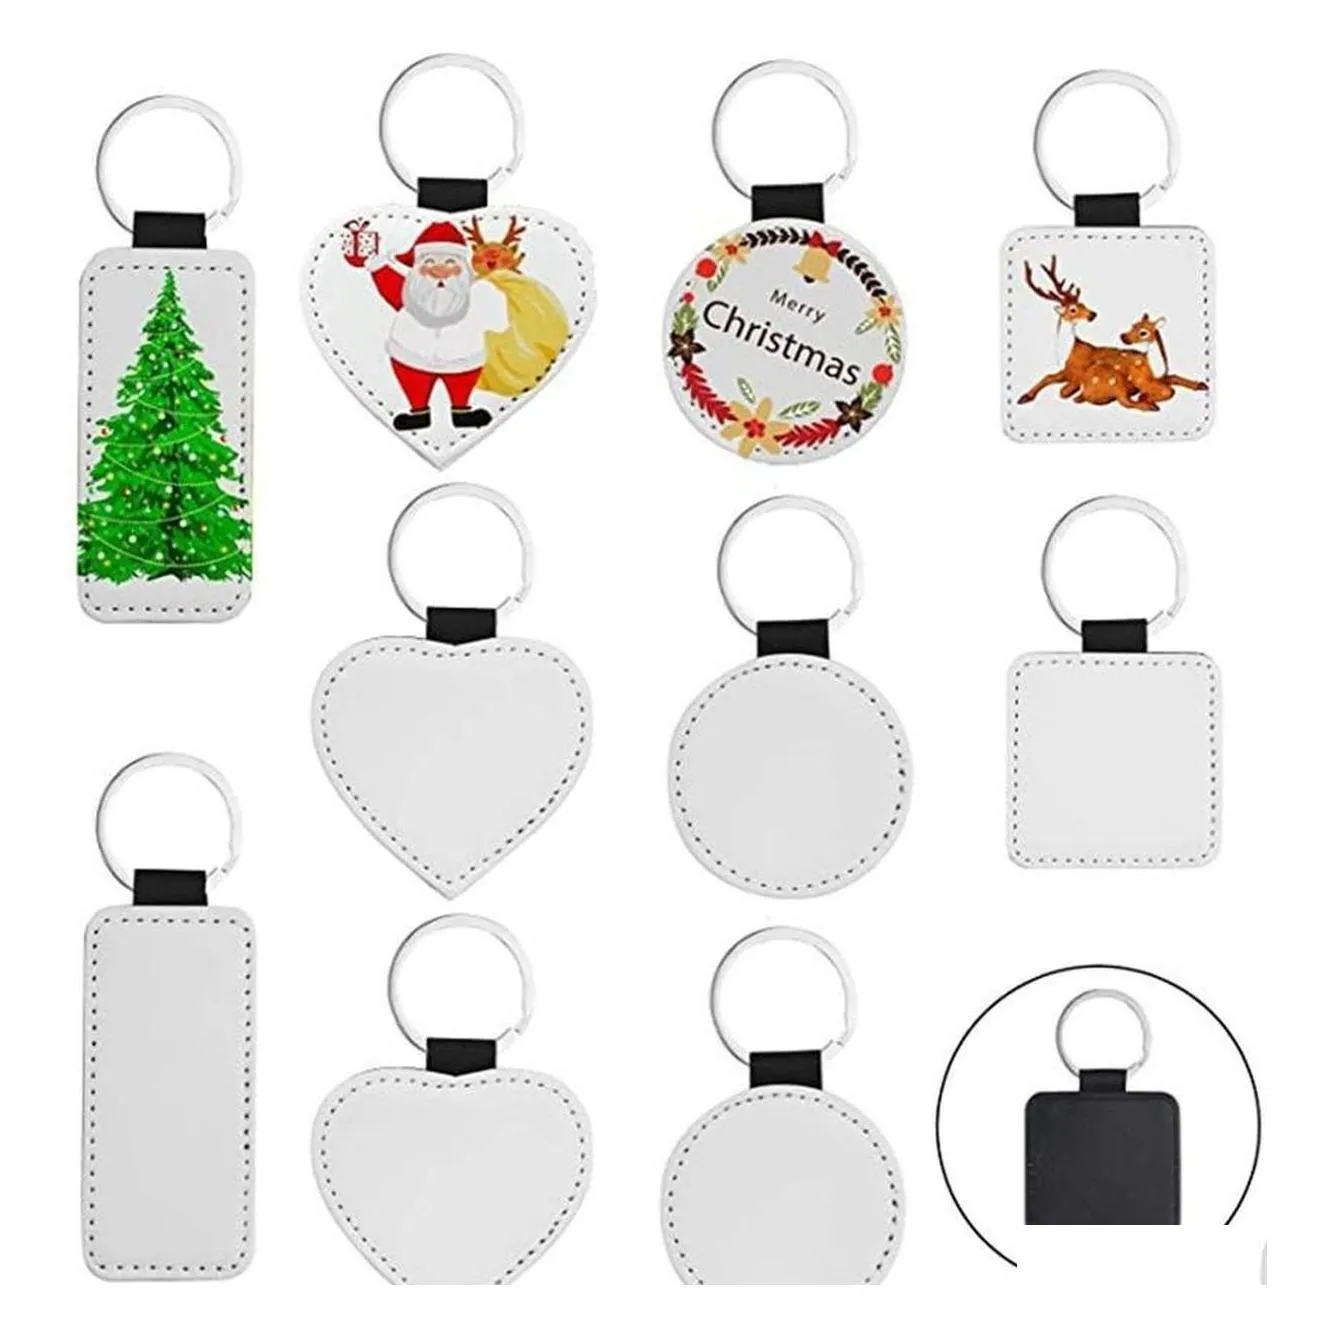 Party Favor Tiktok Sublimation Blanks Keychain Pu Leather For Christmas Heat Transfer Keyring Diy Craft Supplies Dhs Drop Delivery H Dhdsv